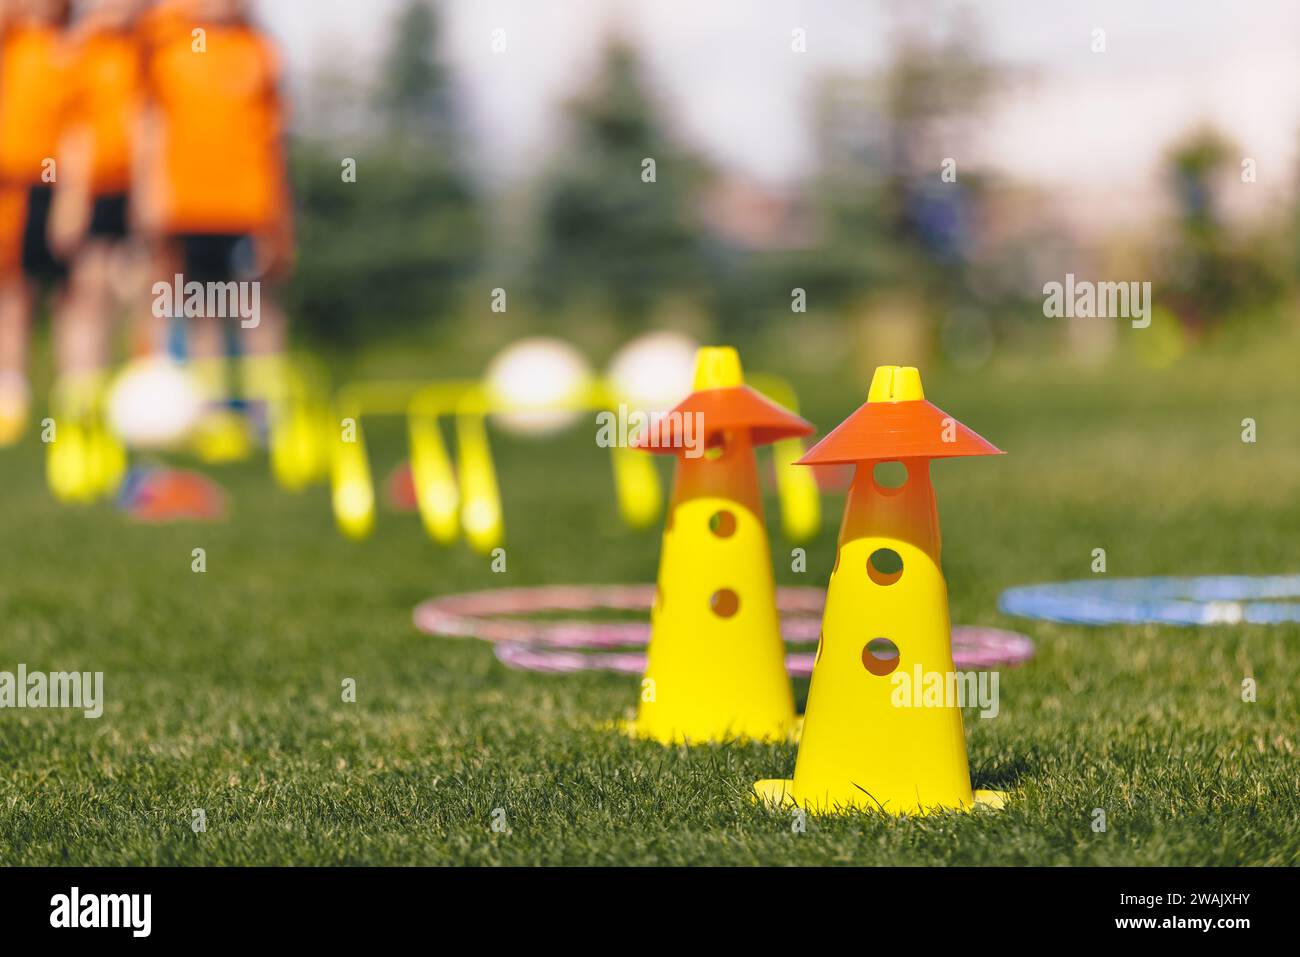 Sports training tools. Soccer equipment on pitch. Yellow and red practice cones on sports field. Children in the background on sports training Stock Photo